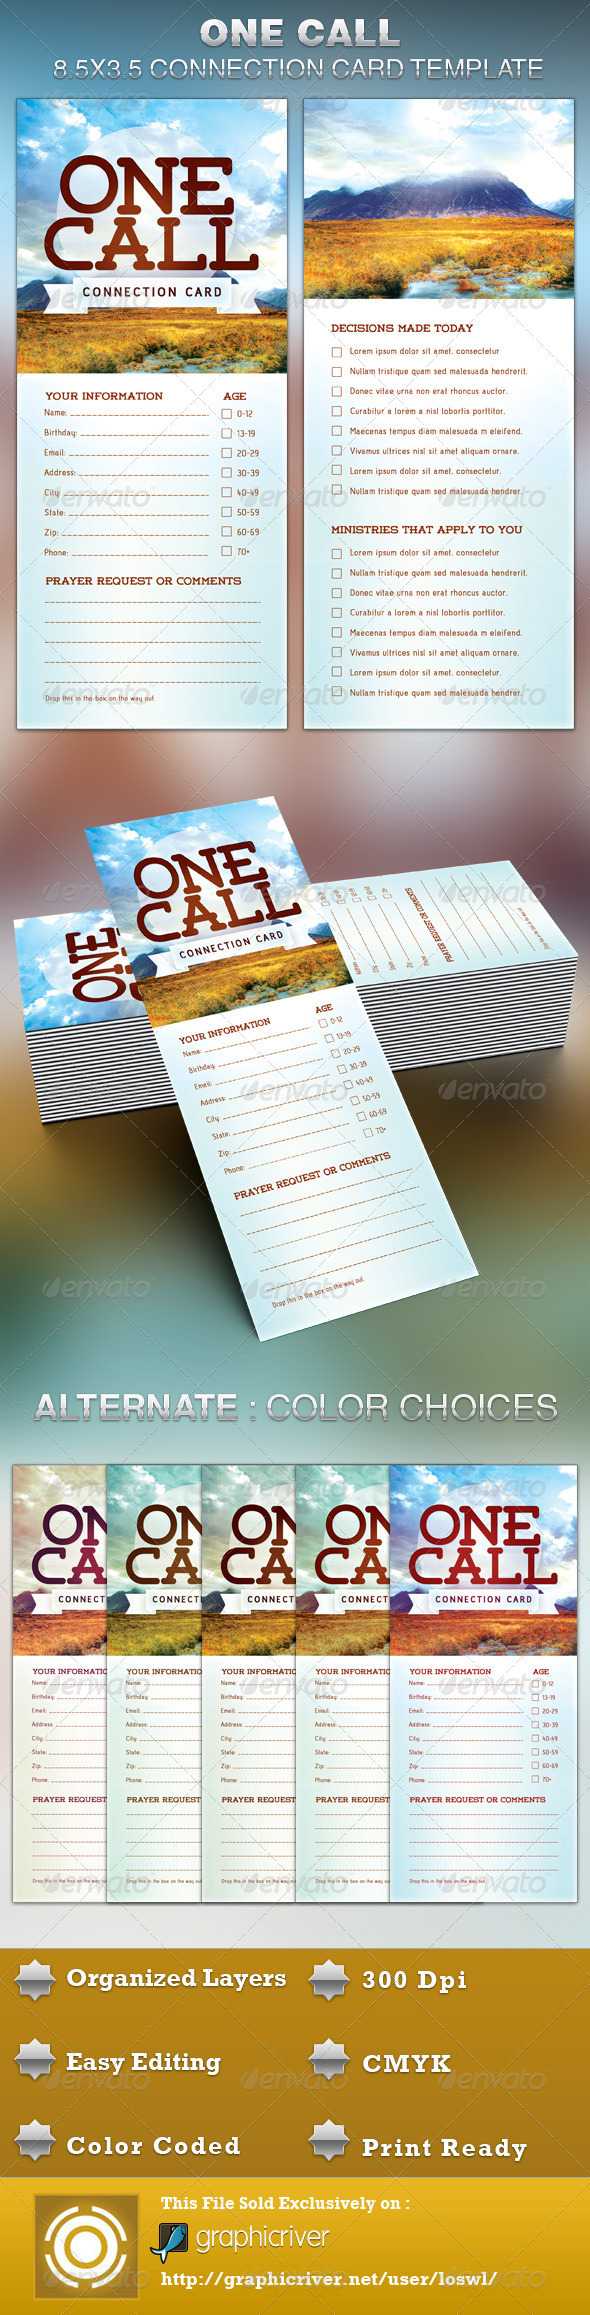 The One Call Church Connection Card Template Is Great For With Decision Card Template